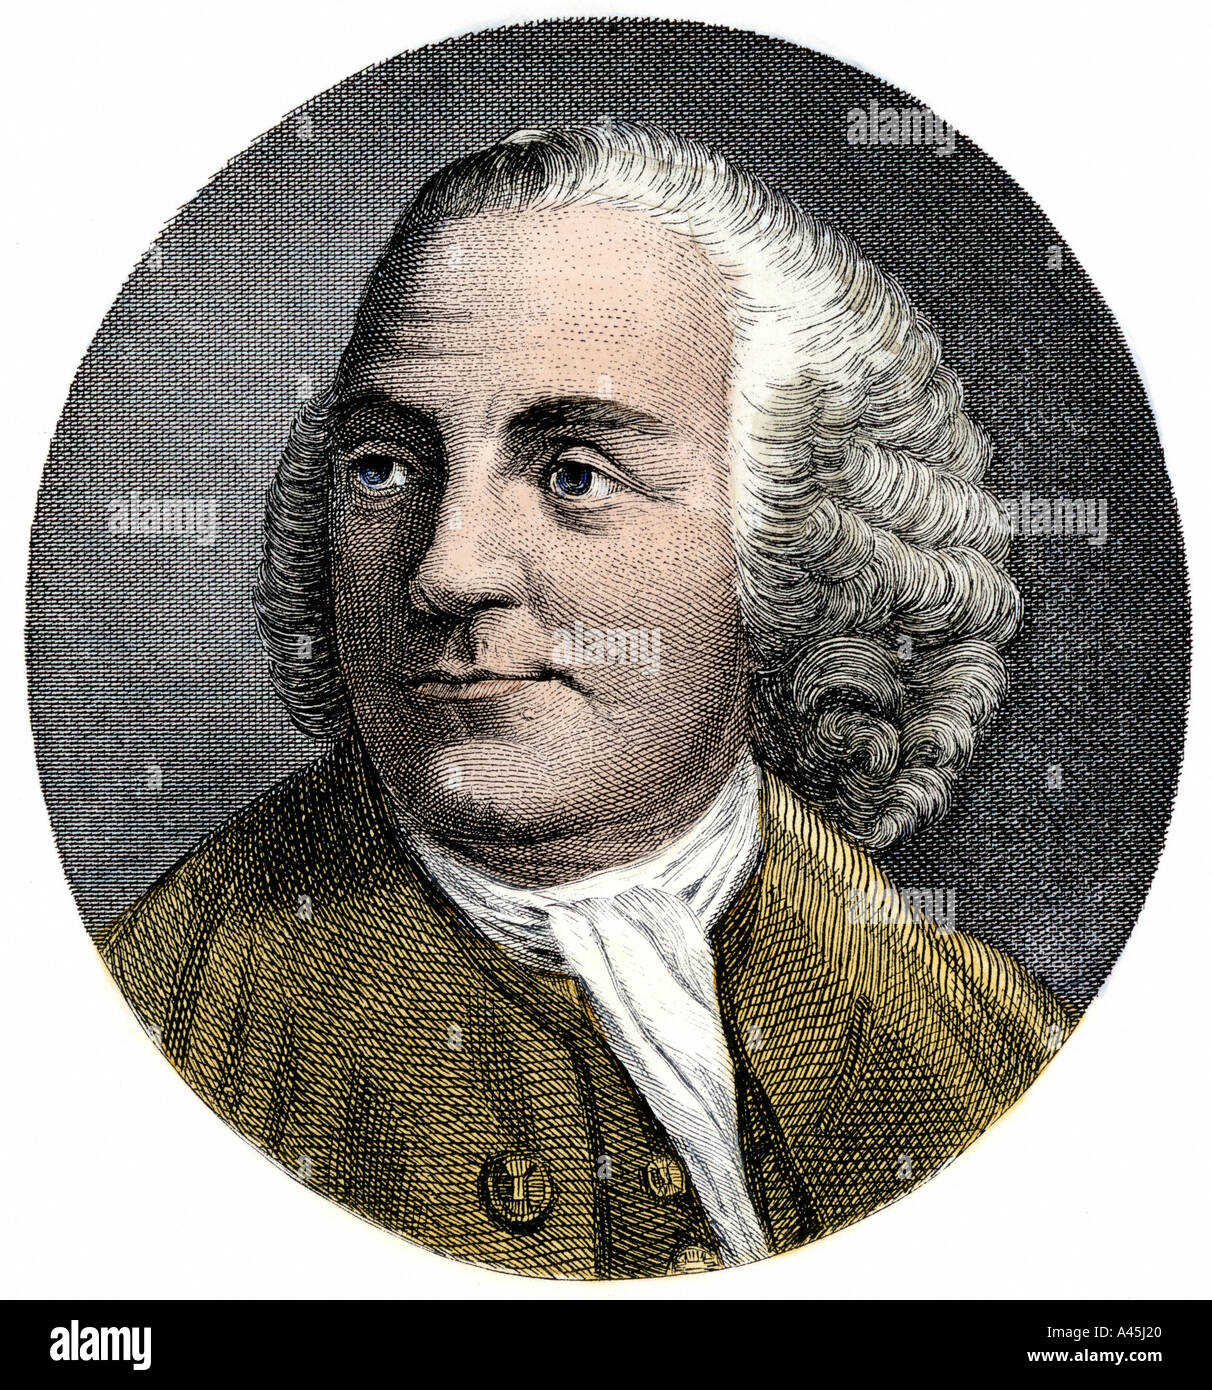 Benjamin Franklin portrait while in London 1777. Hand-colored woodcut Stock Photo